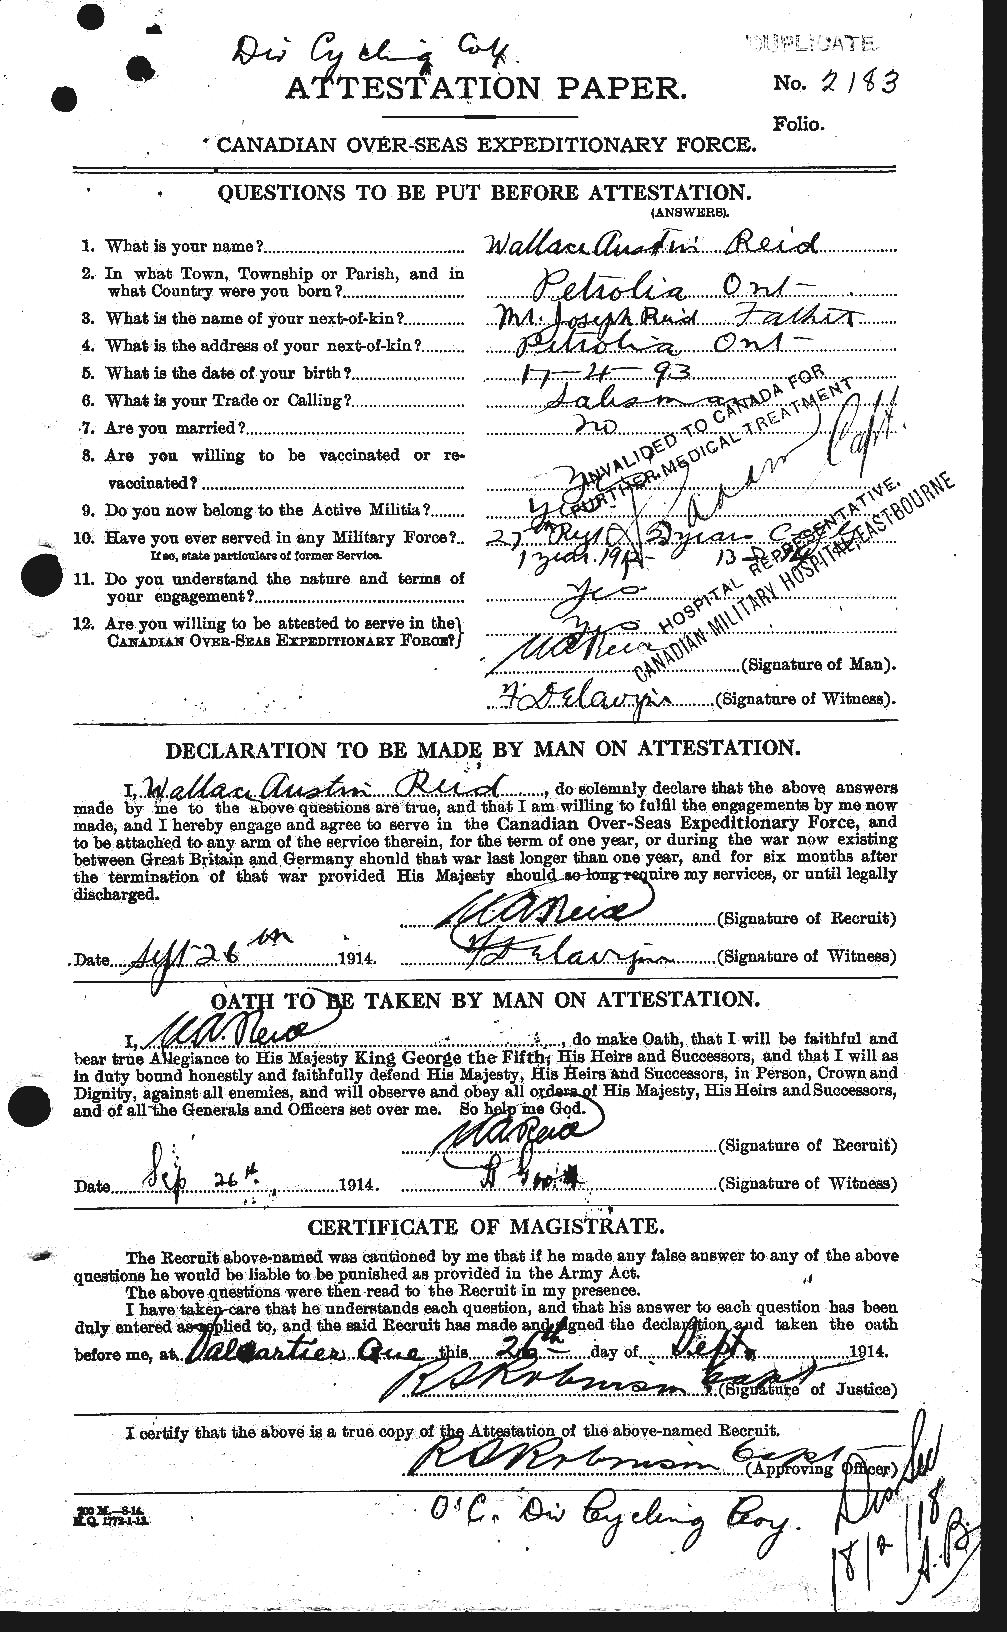 Personnel Records of the First World War - CEF 596878a